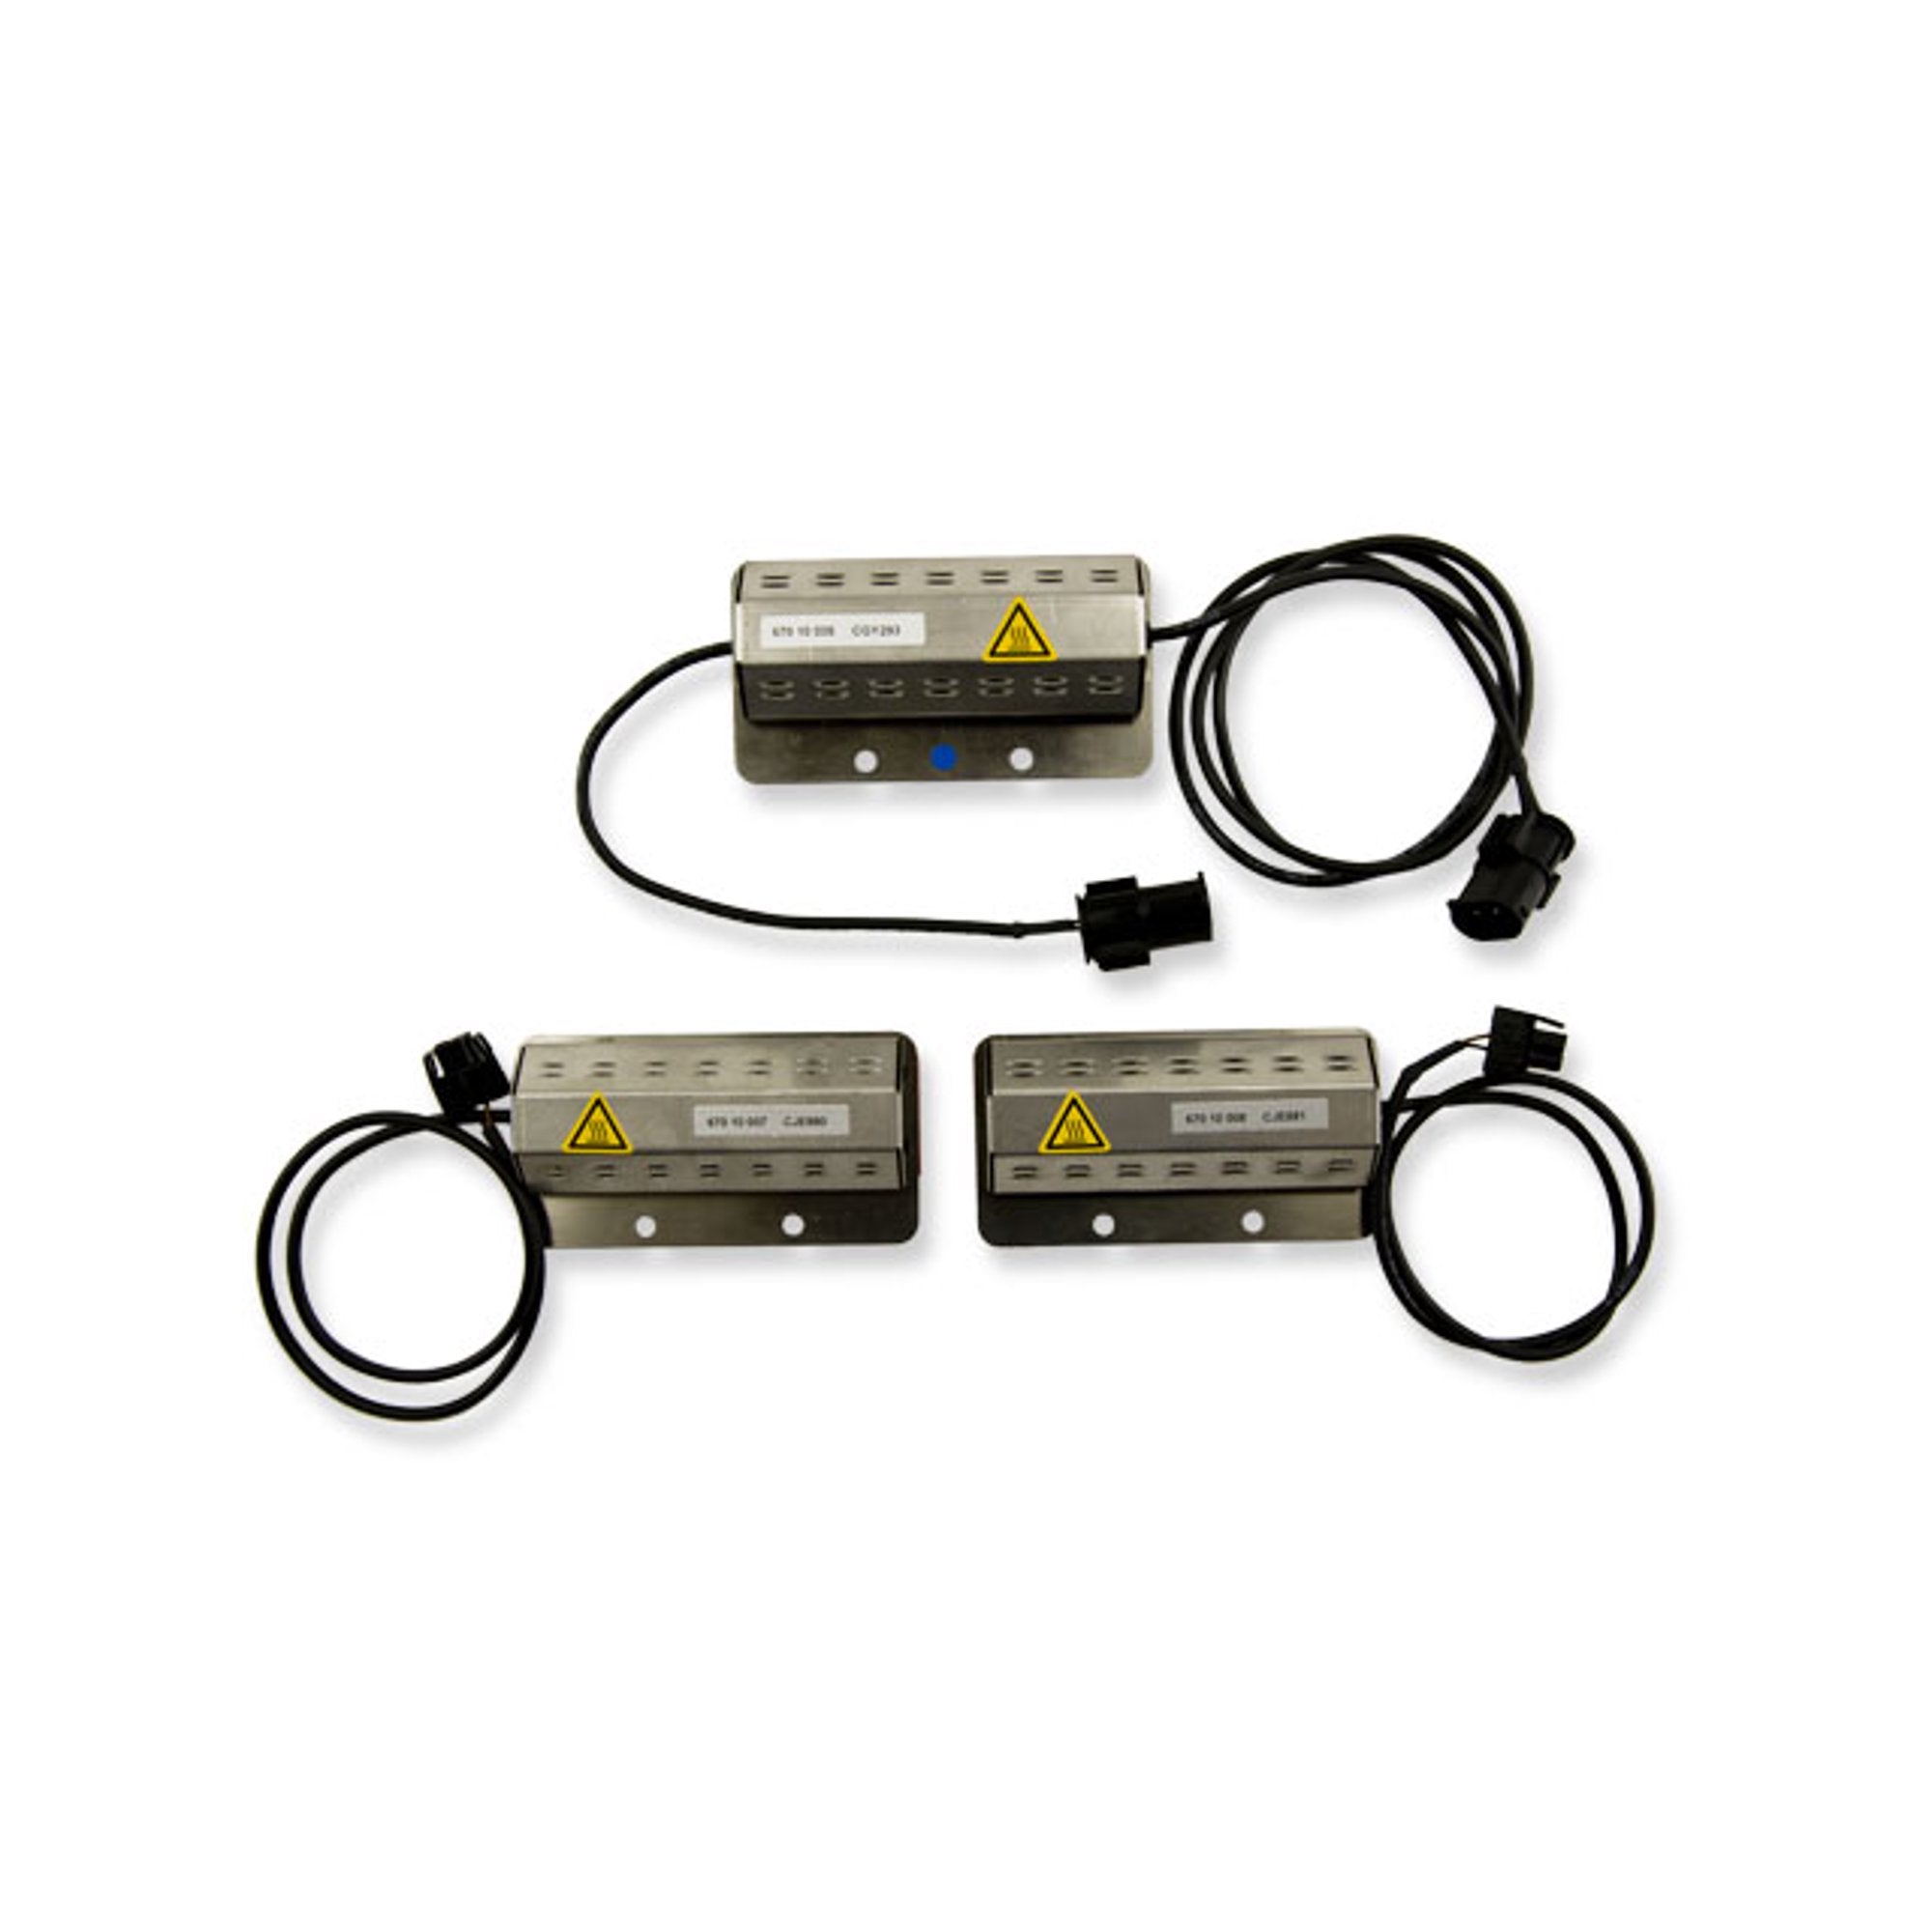 KW Electronic Damping Cancellation Kit Porsche 911 (997) exc convertible